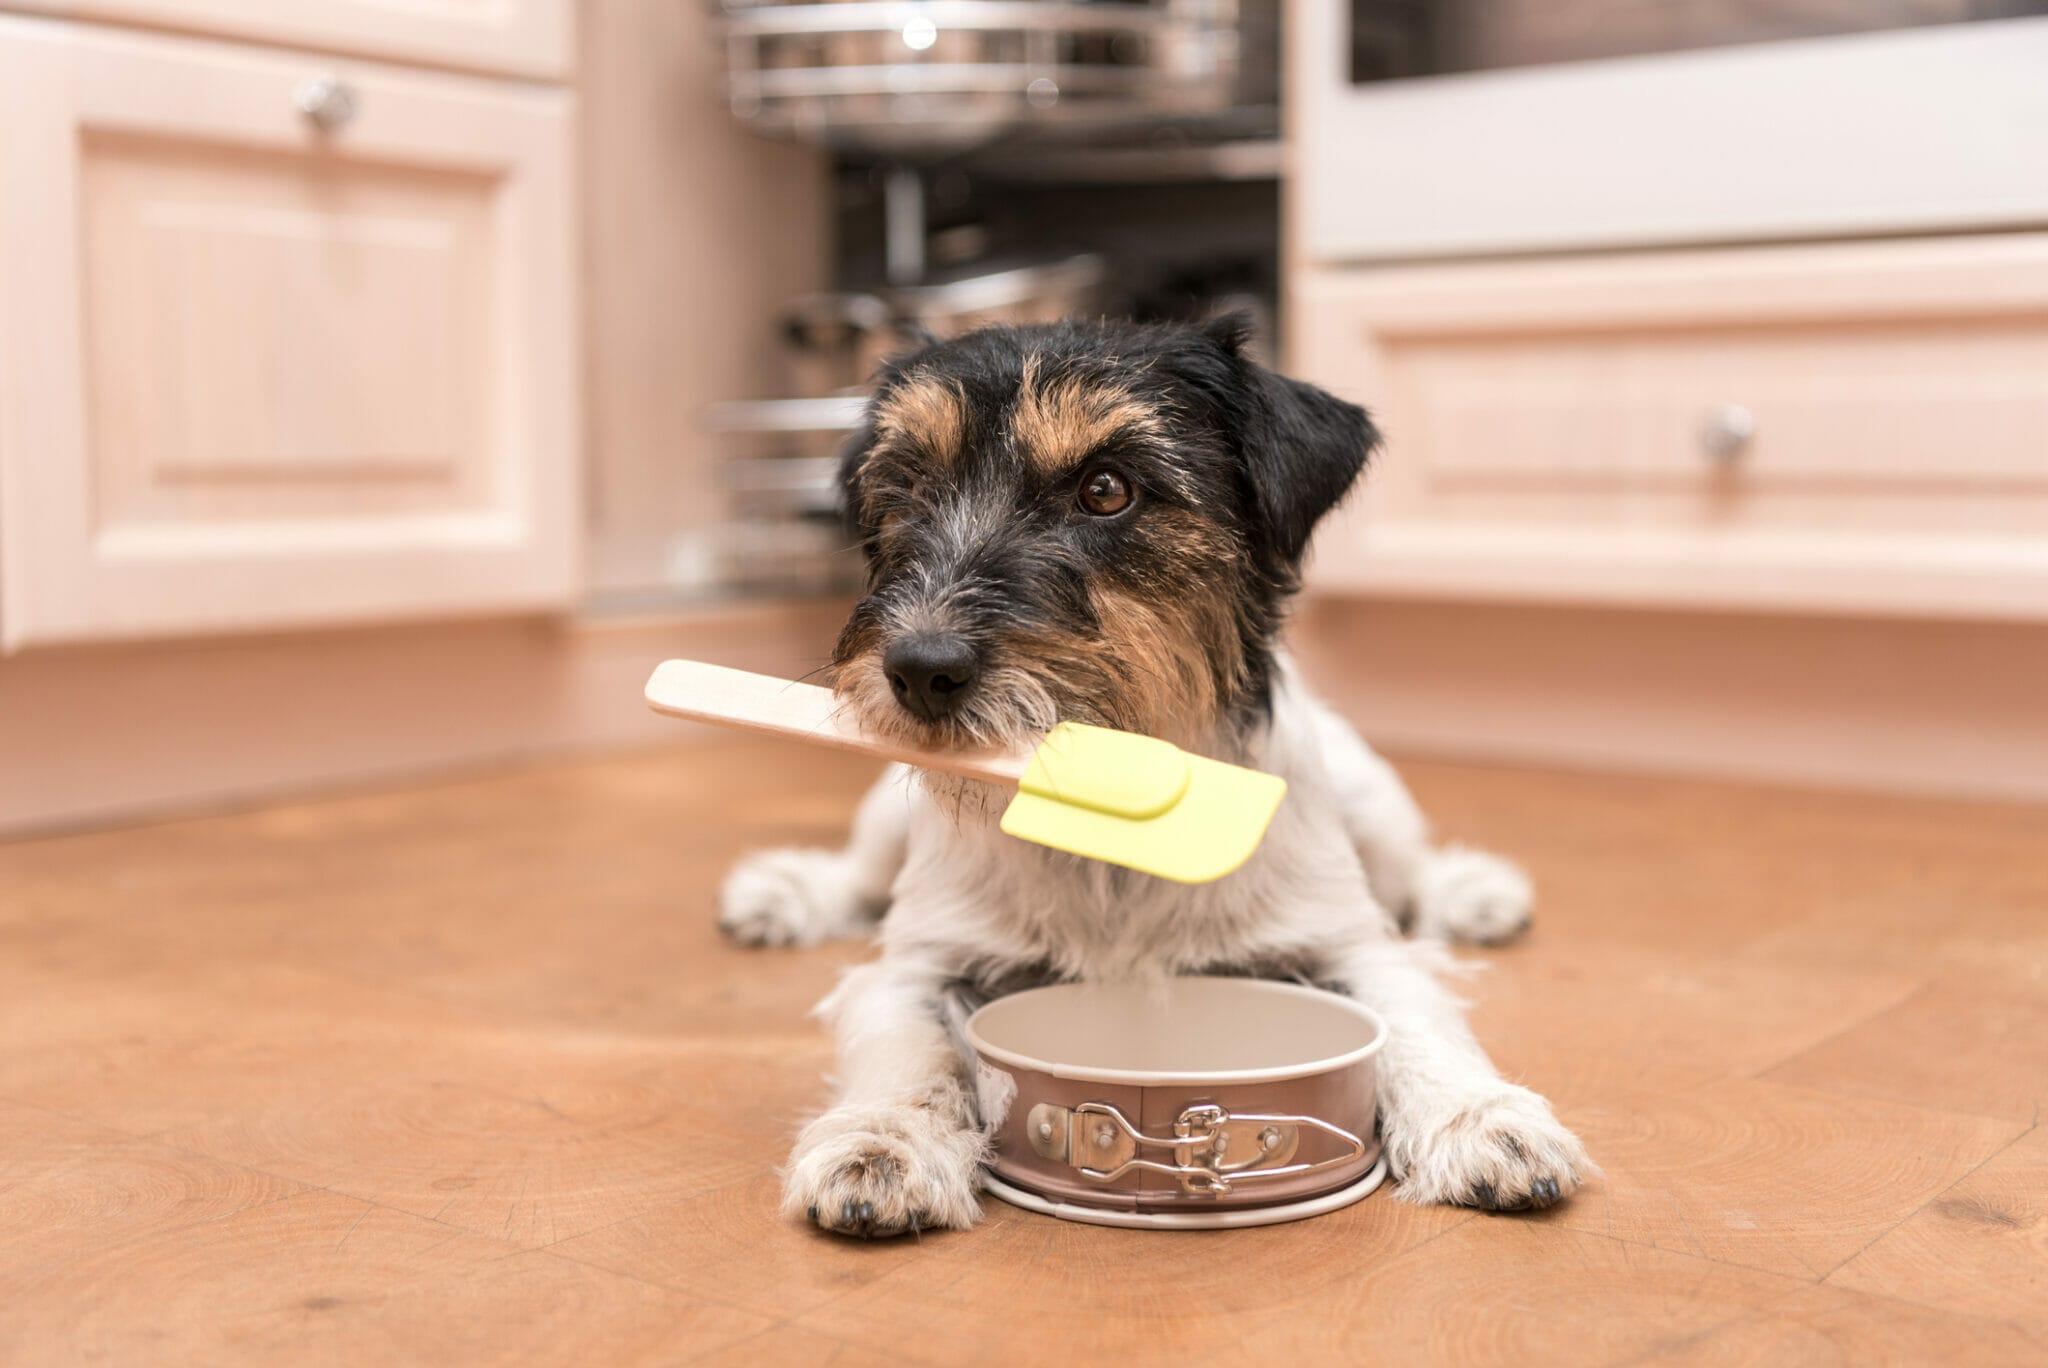 How to soften food for a dog with no teeth